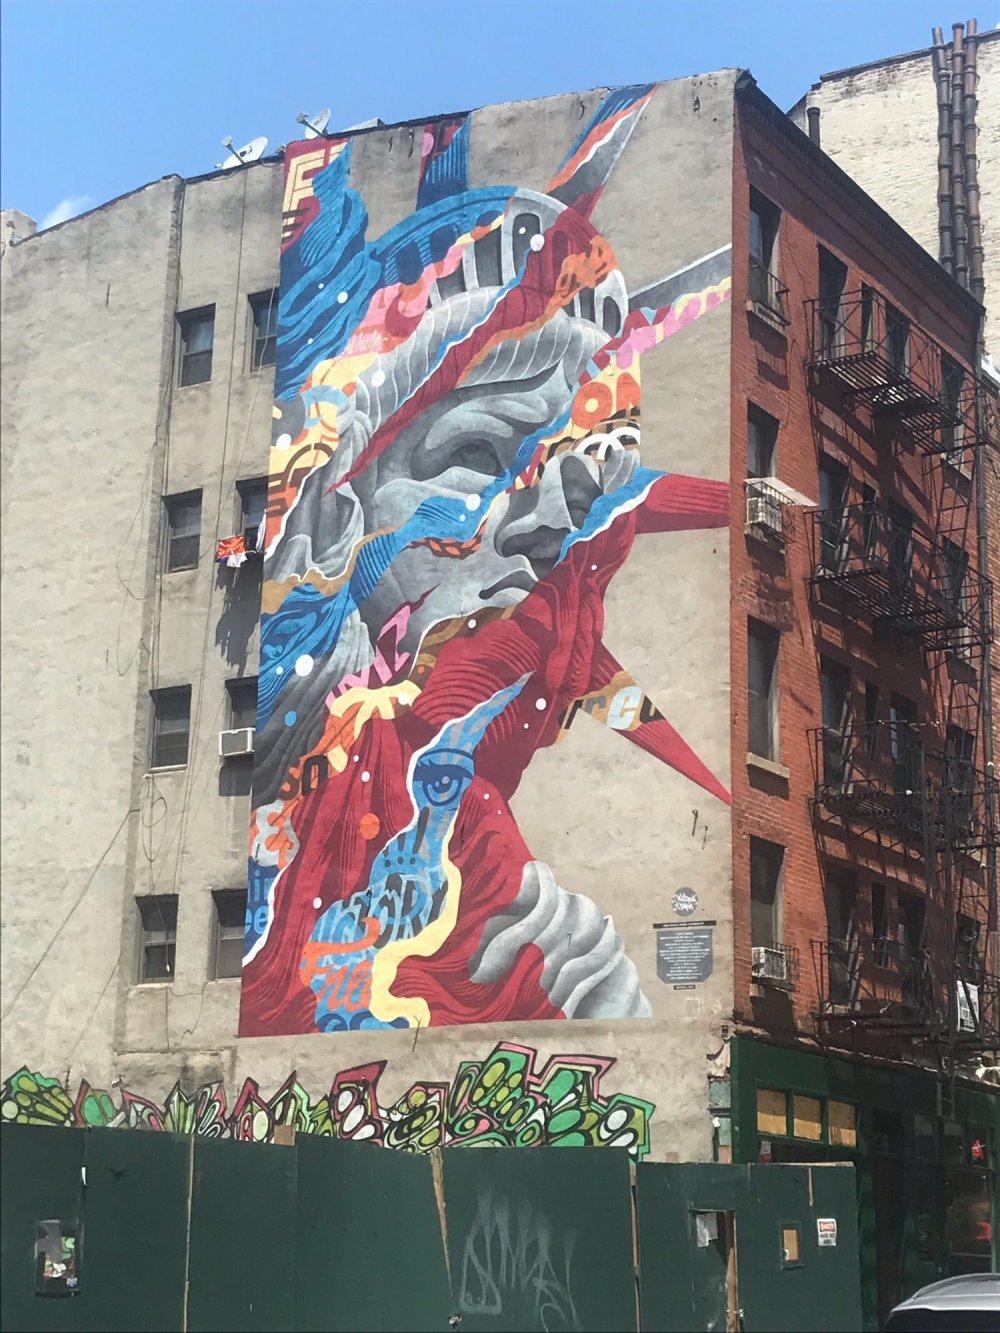 mural in New York by artist Tristan Eaton.